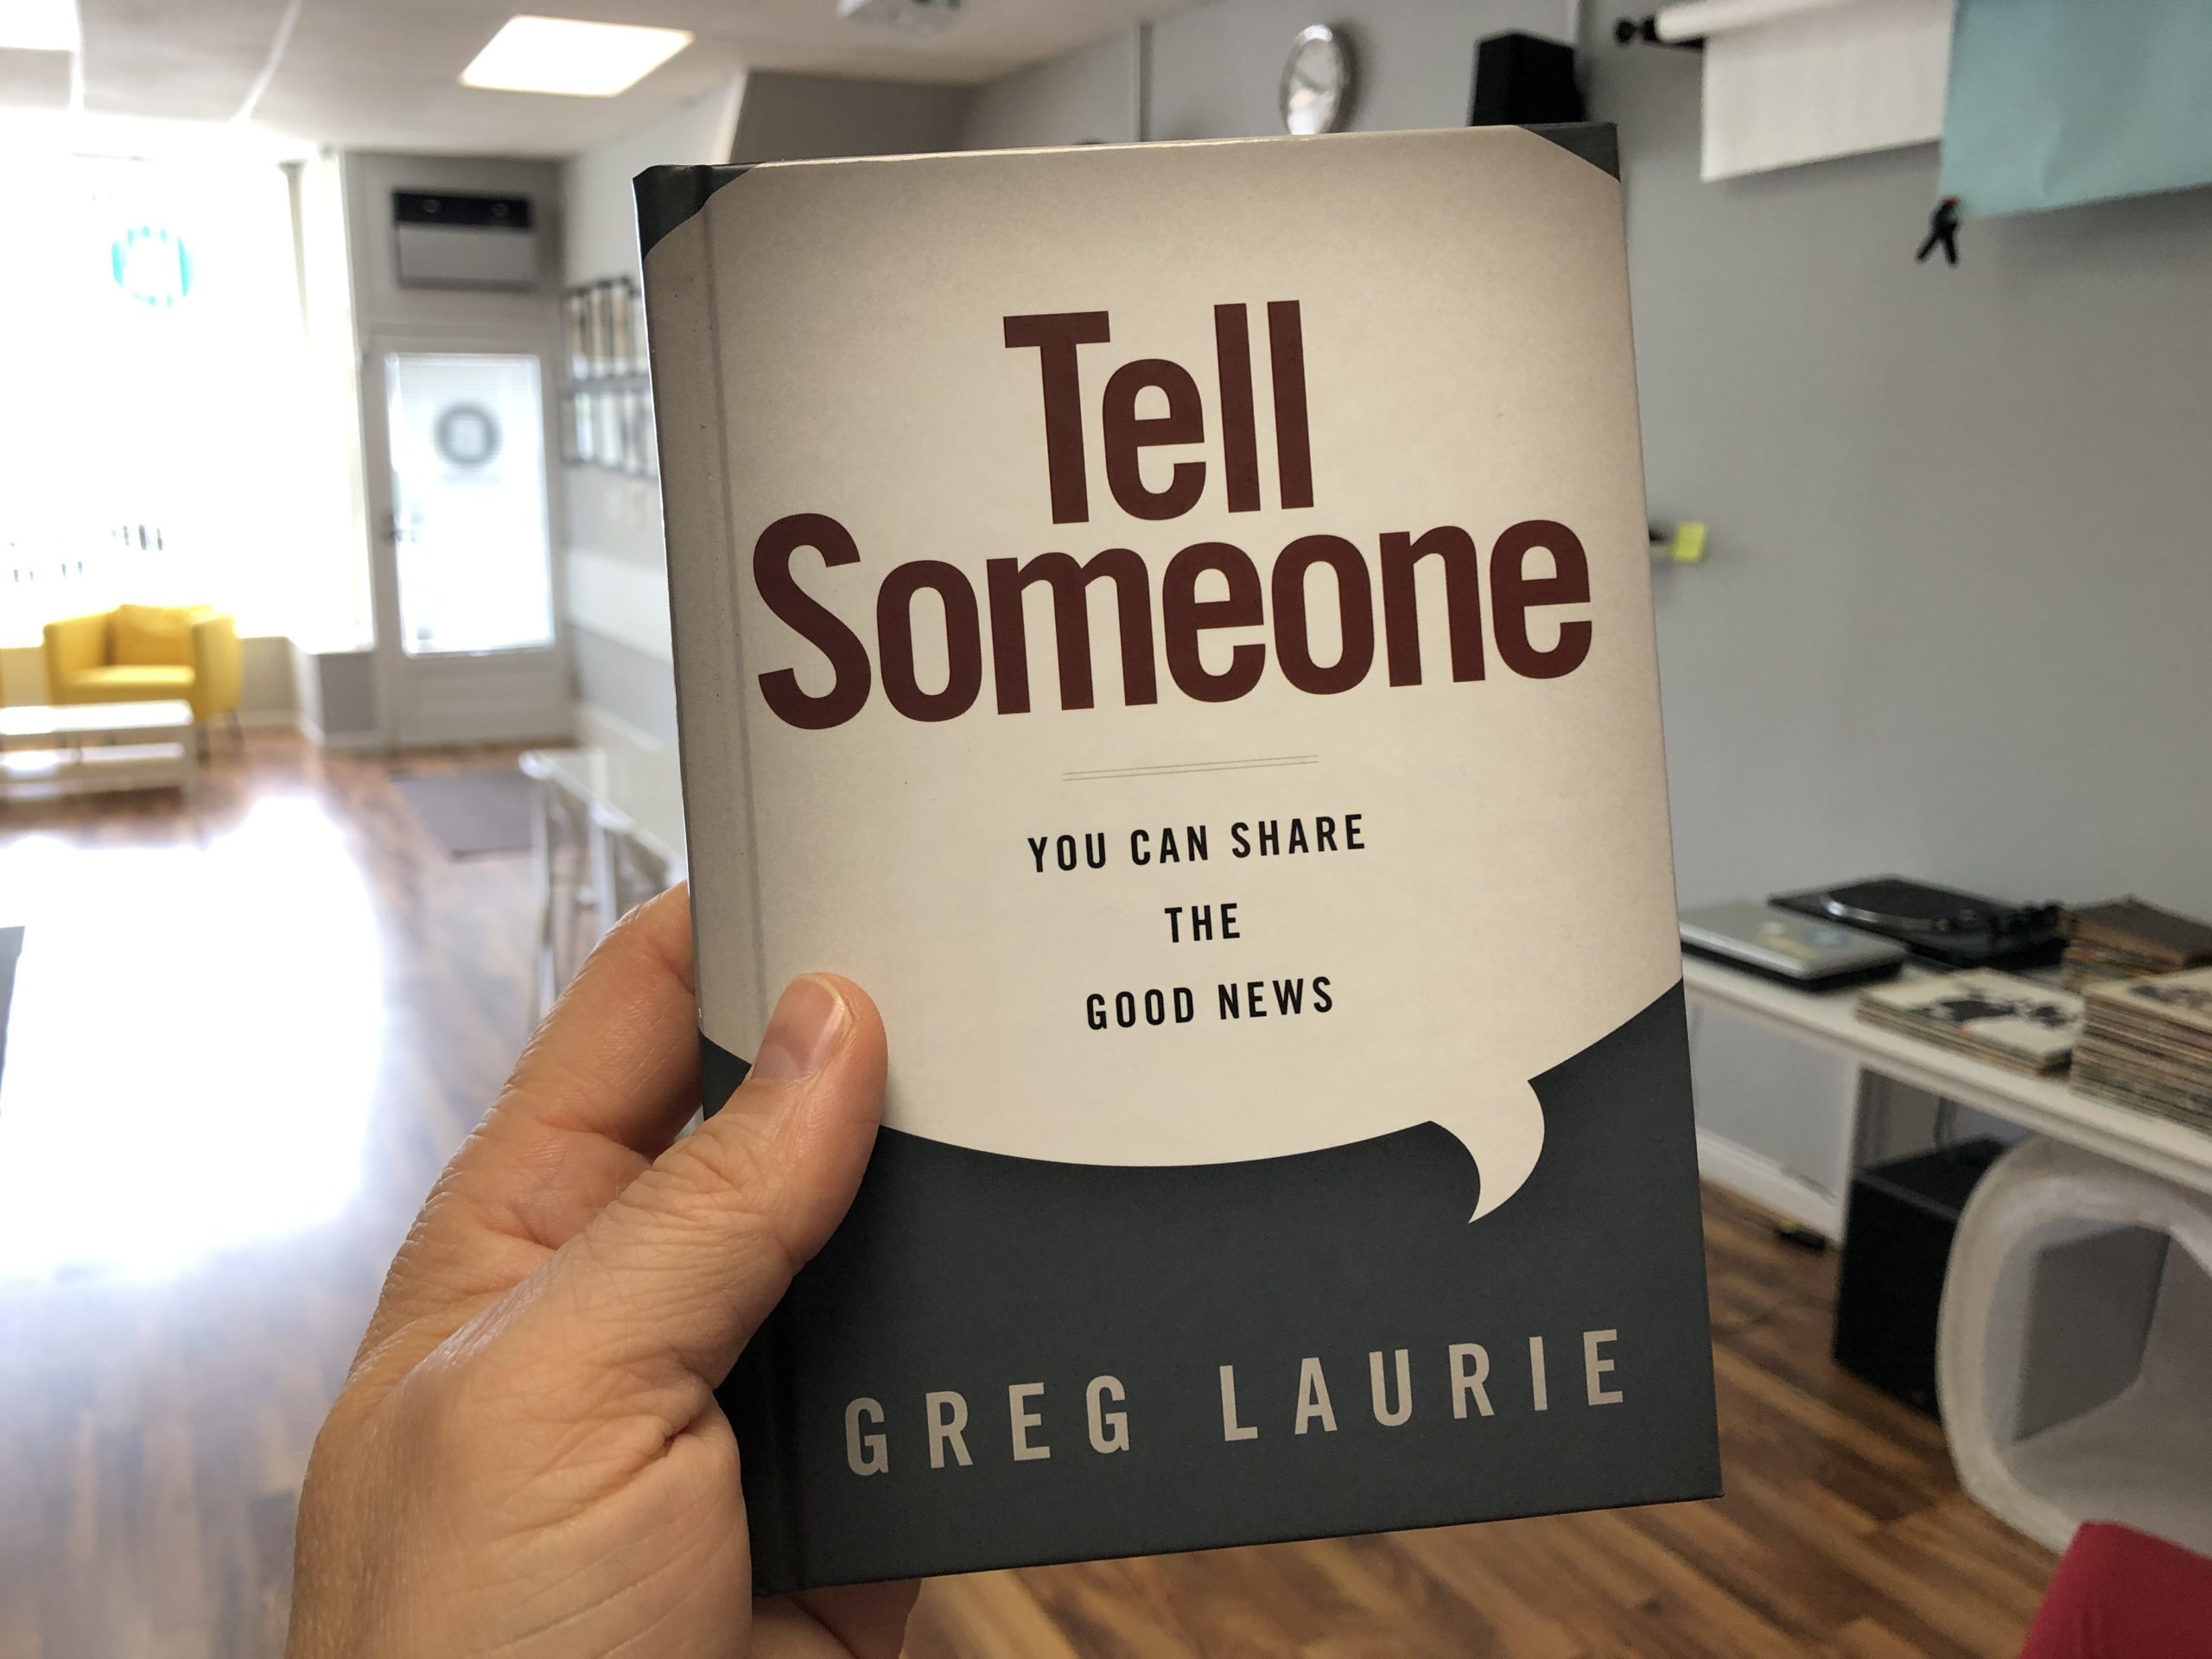 personal evangelism book Tell Someone by Greg Laurie